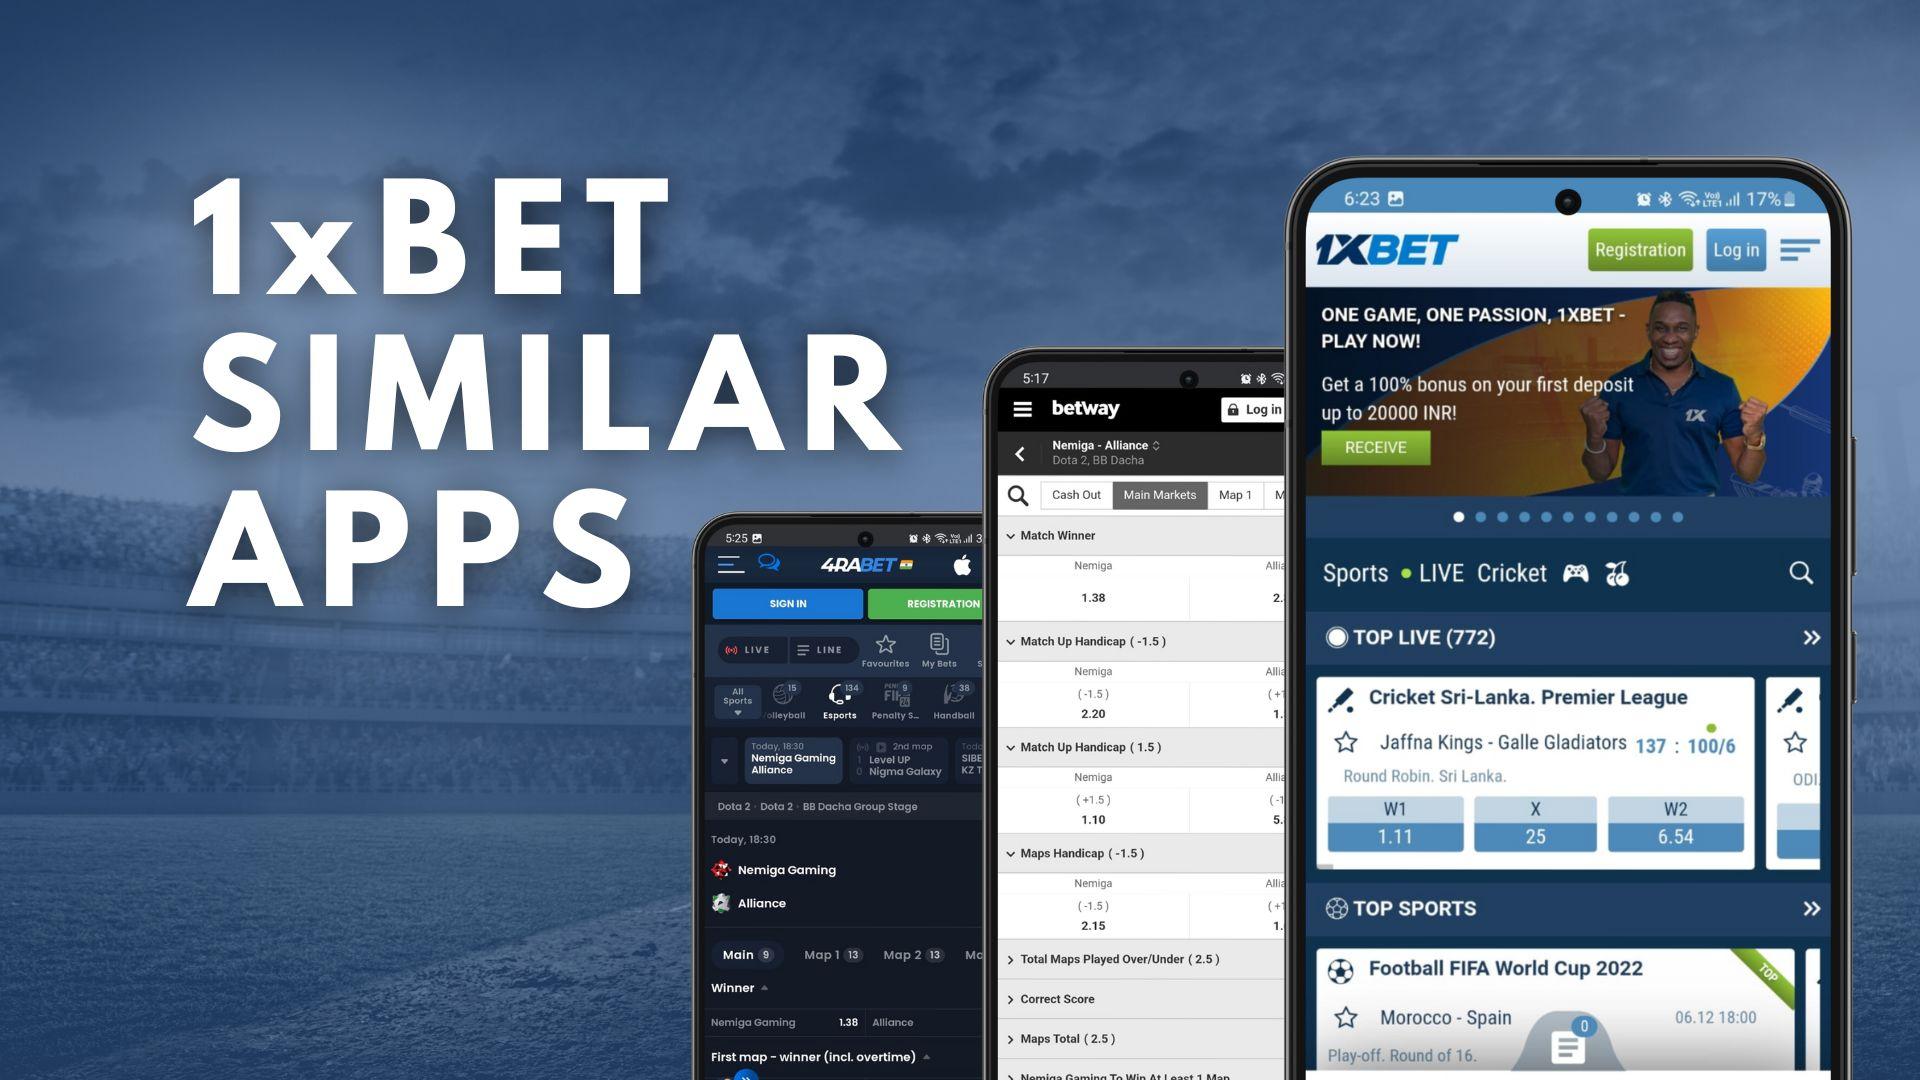 Article main image with betting sites like 1xbet